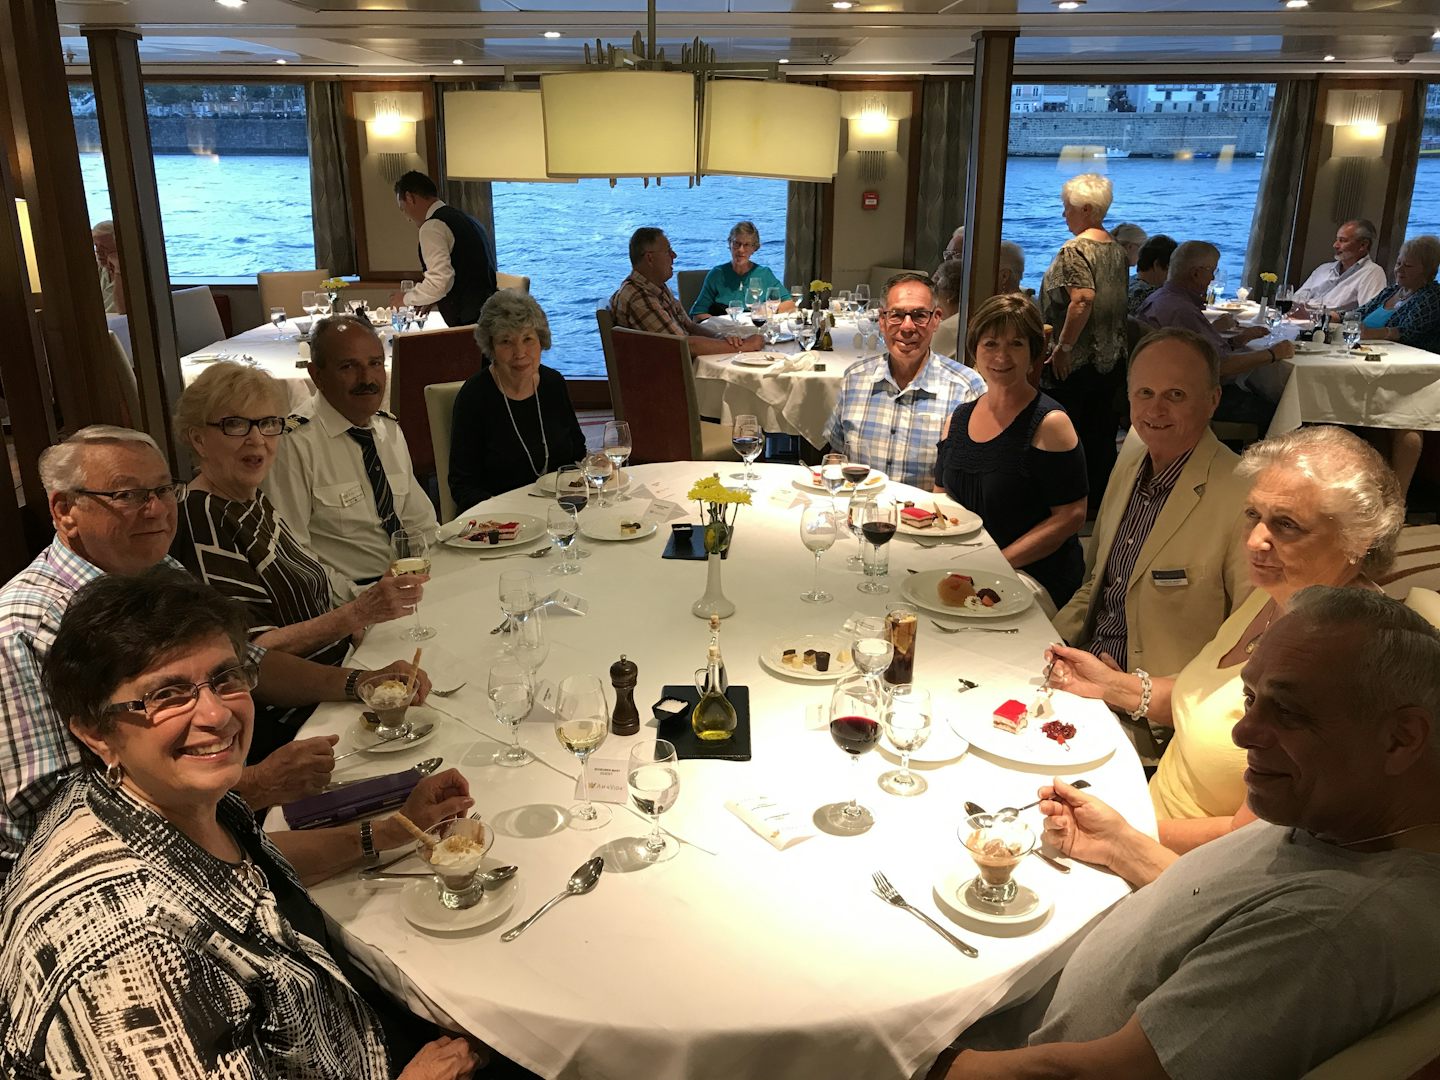 We were invited to dinner with our Cruise Manager, Christian Abker and Capt